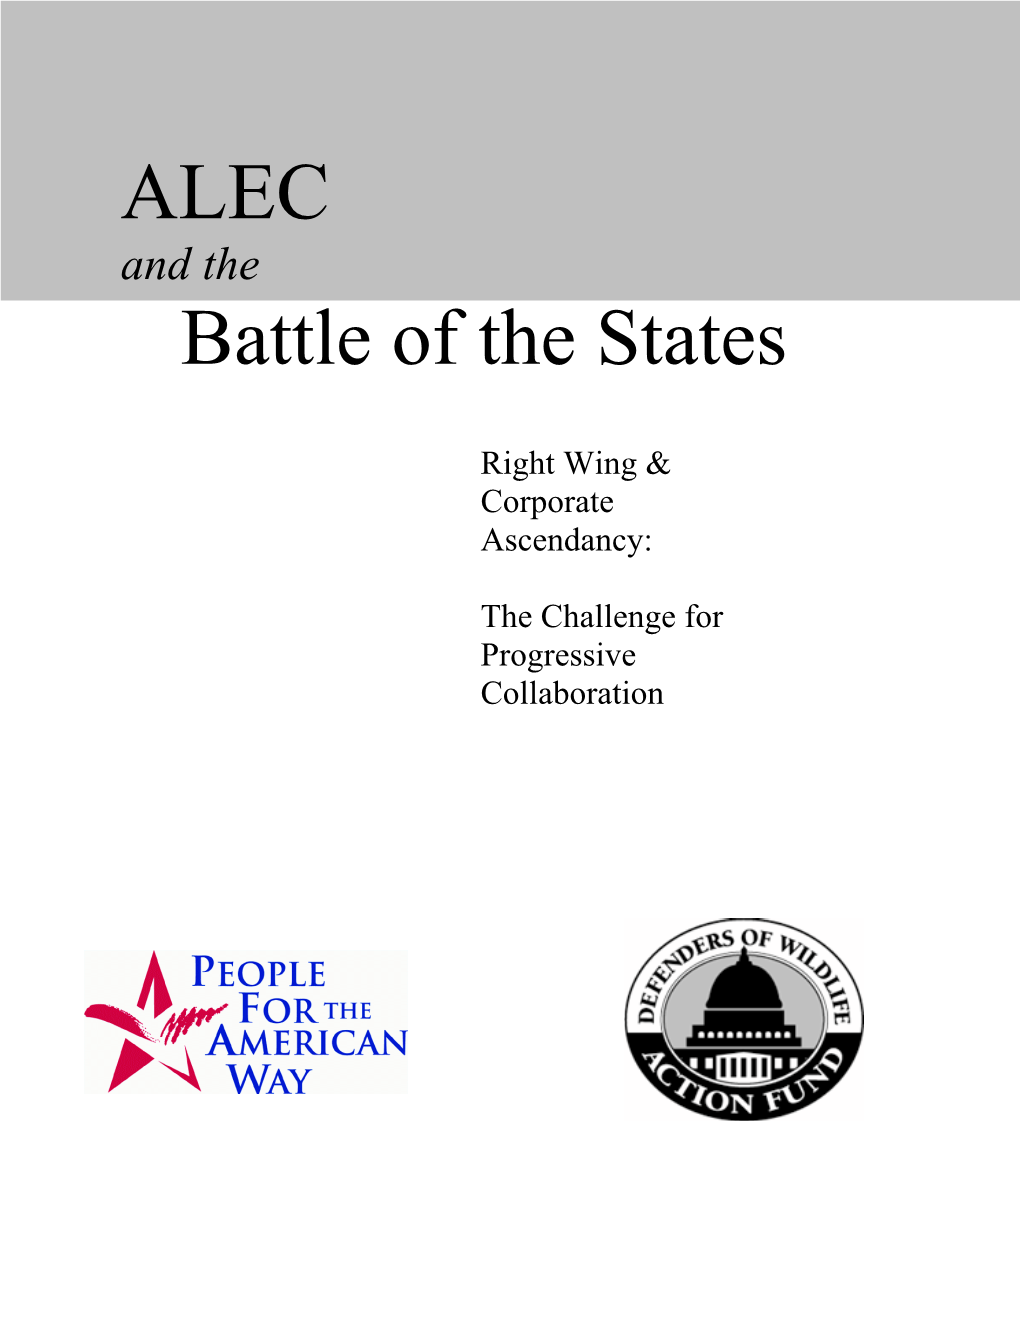 ALEC Battle of the States